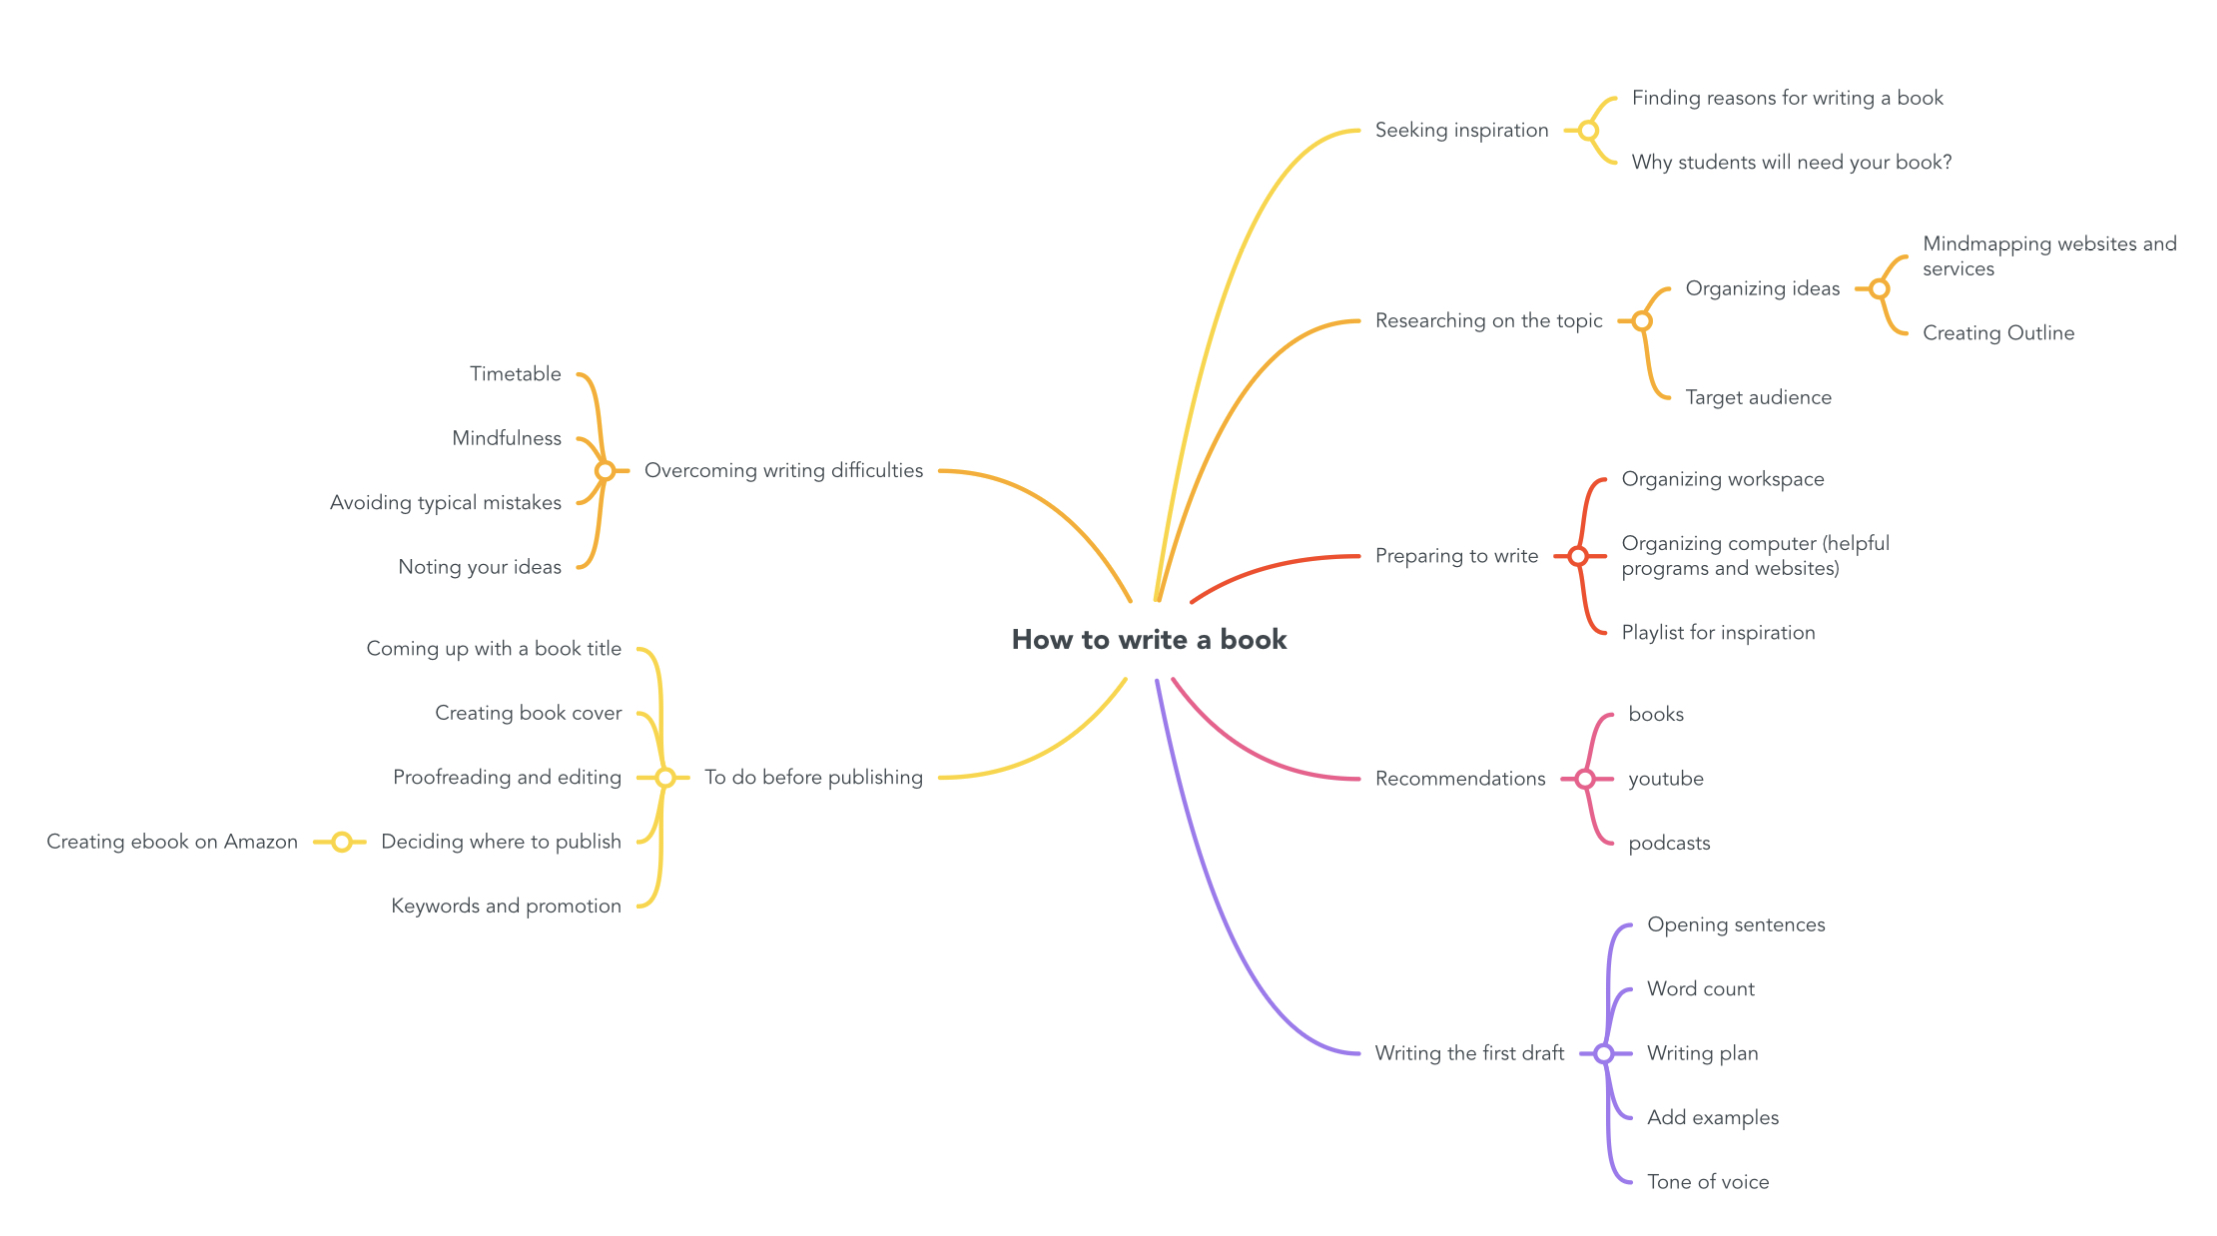 Mindmap on how to write a book